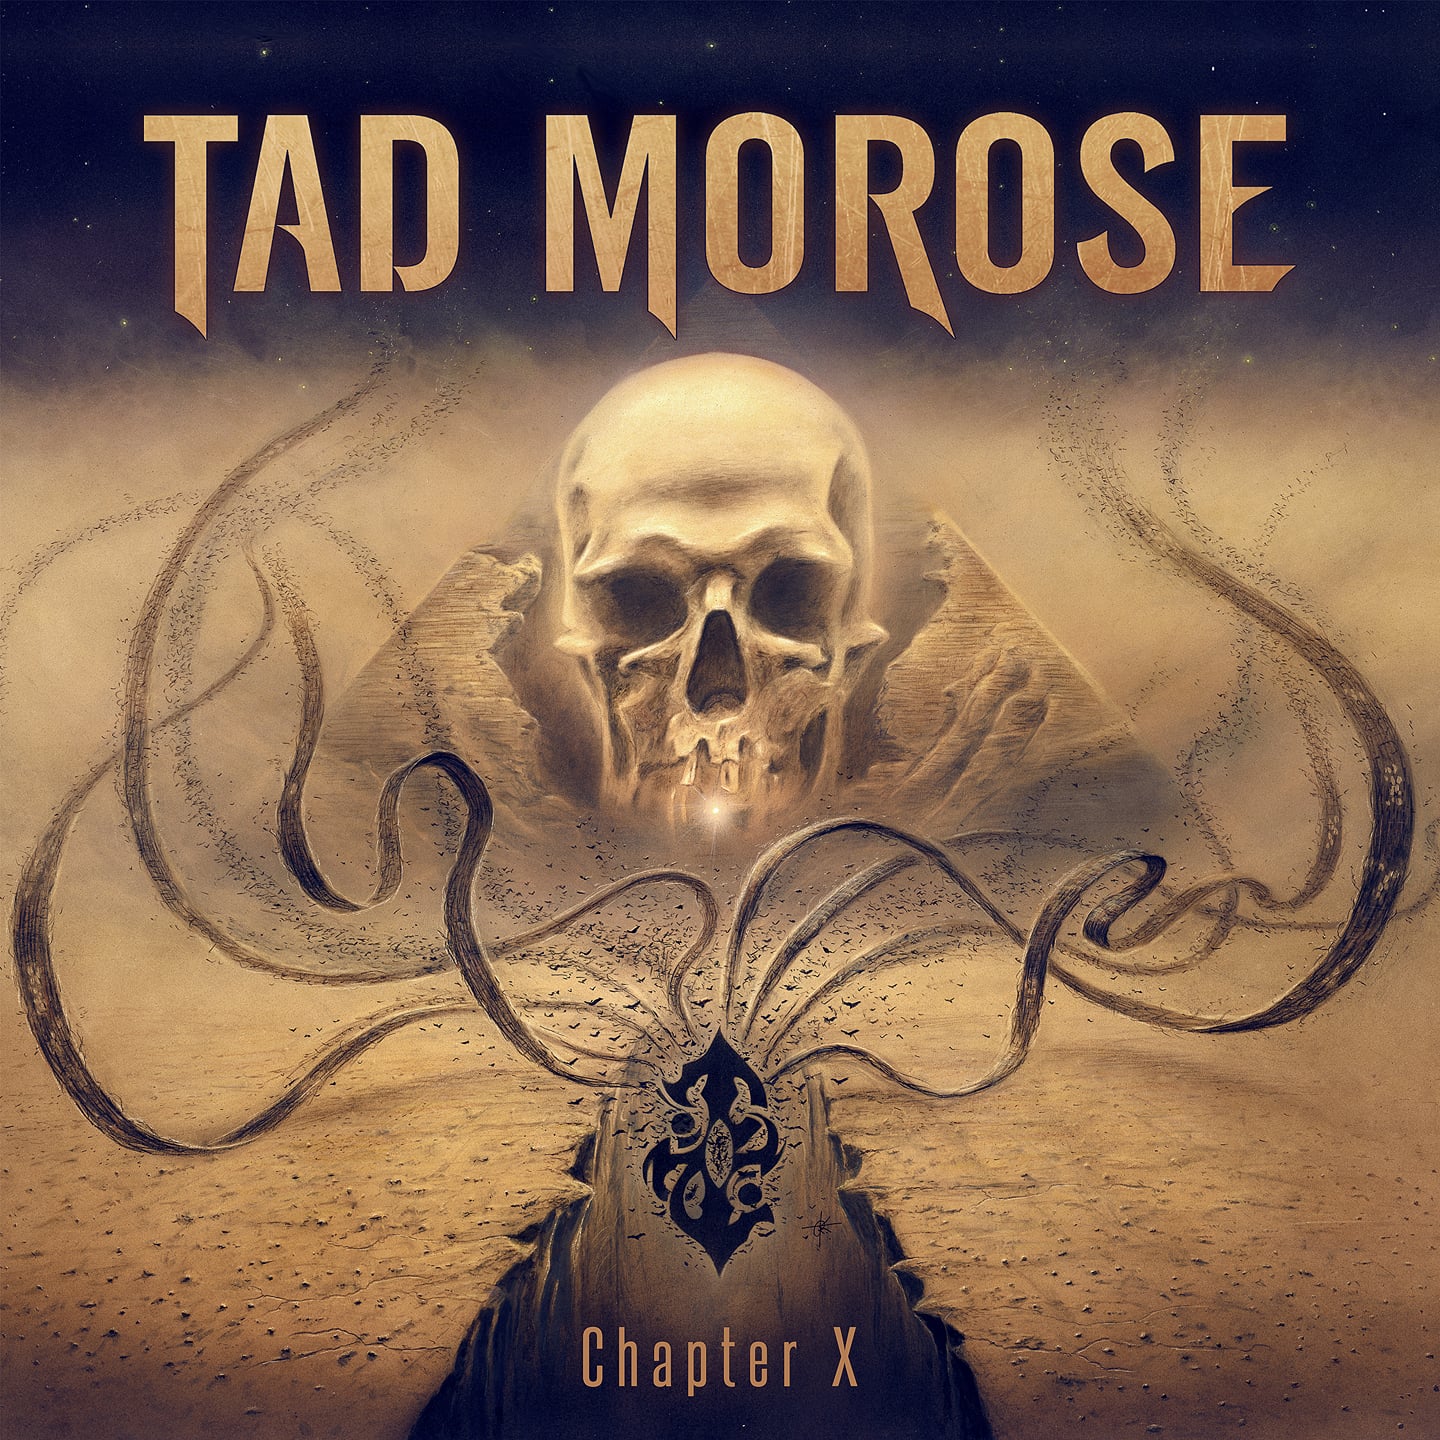 Pre-orders available for Tad Morose new album ‘Chapter X’